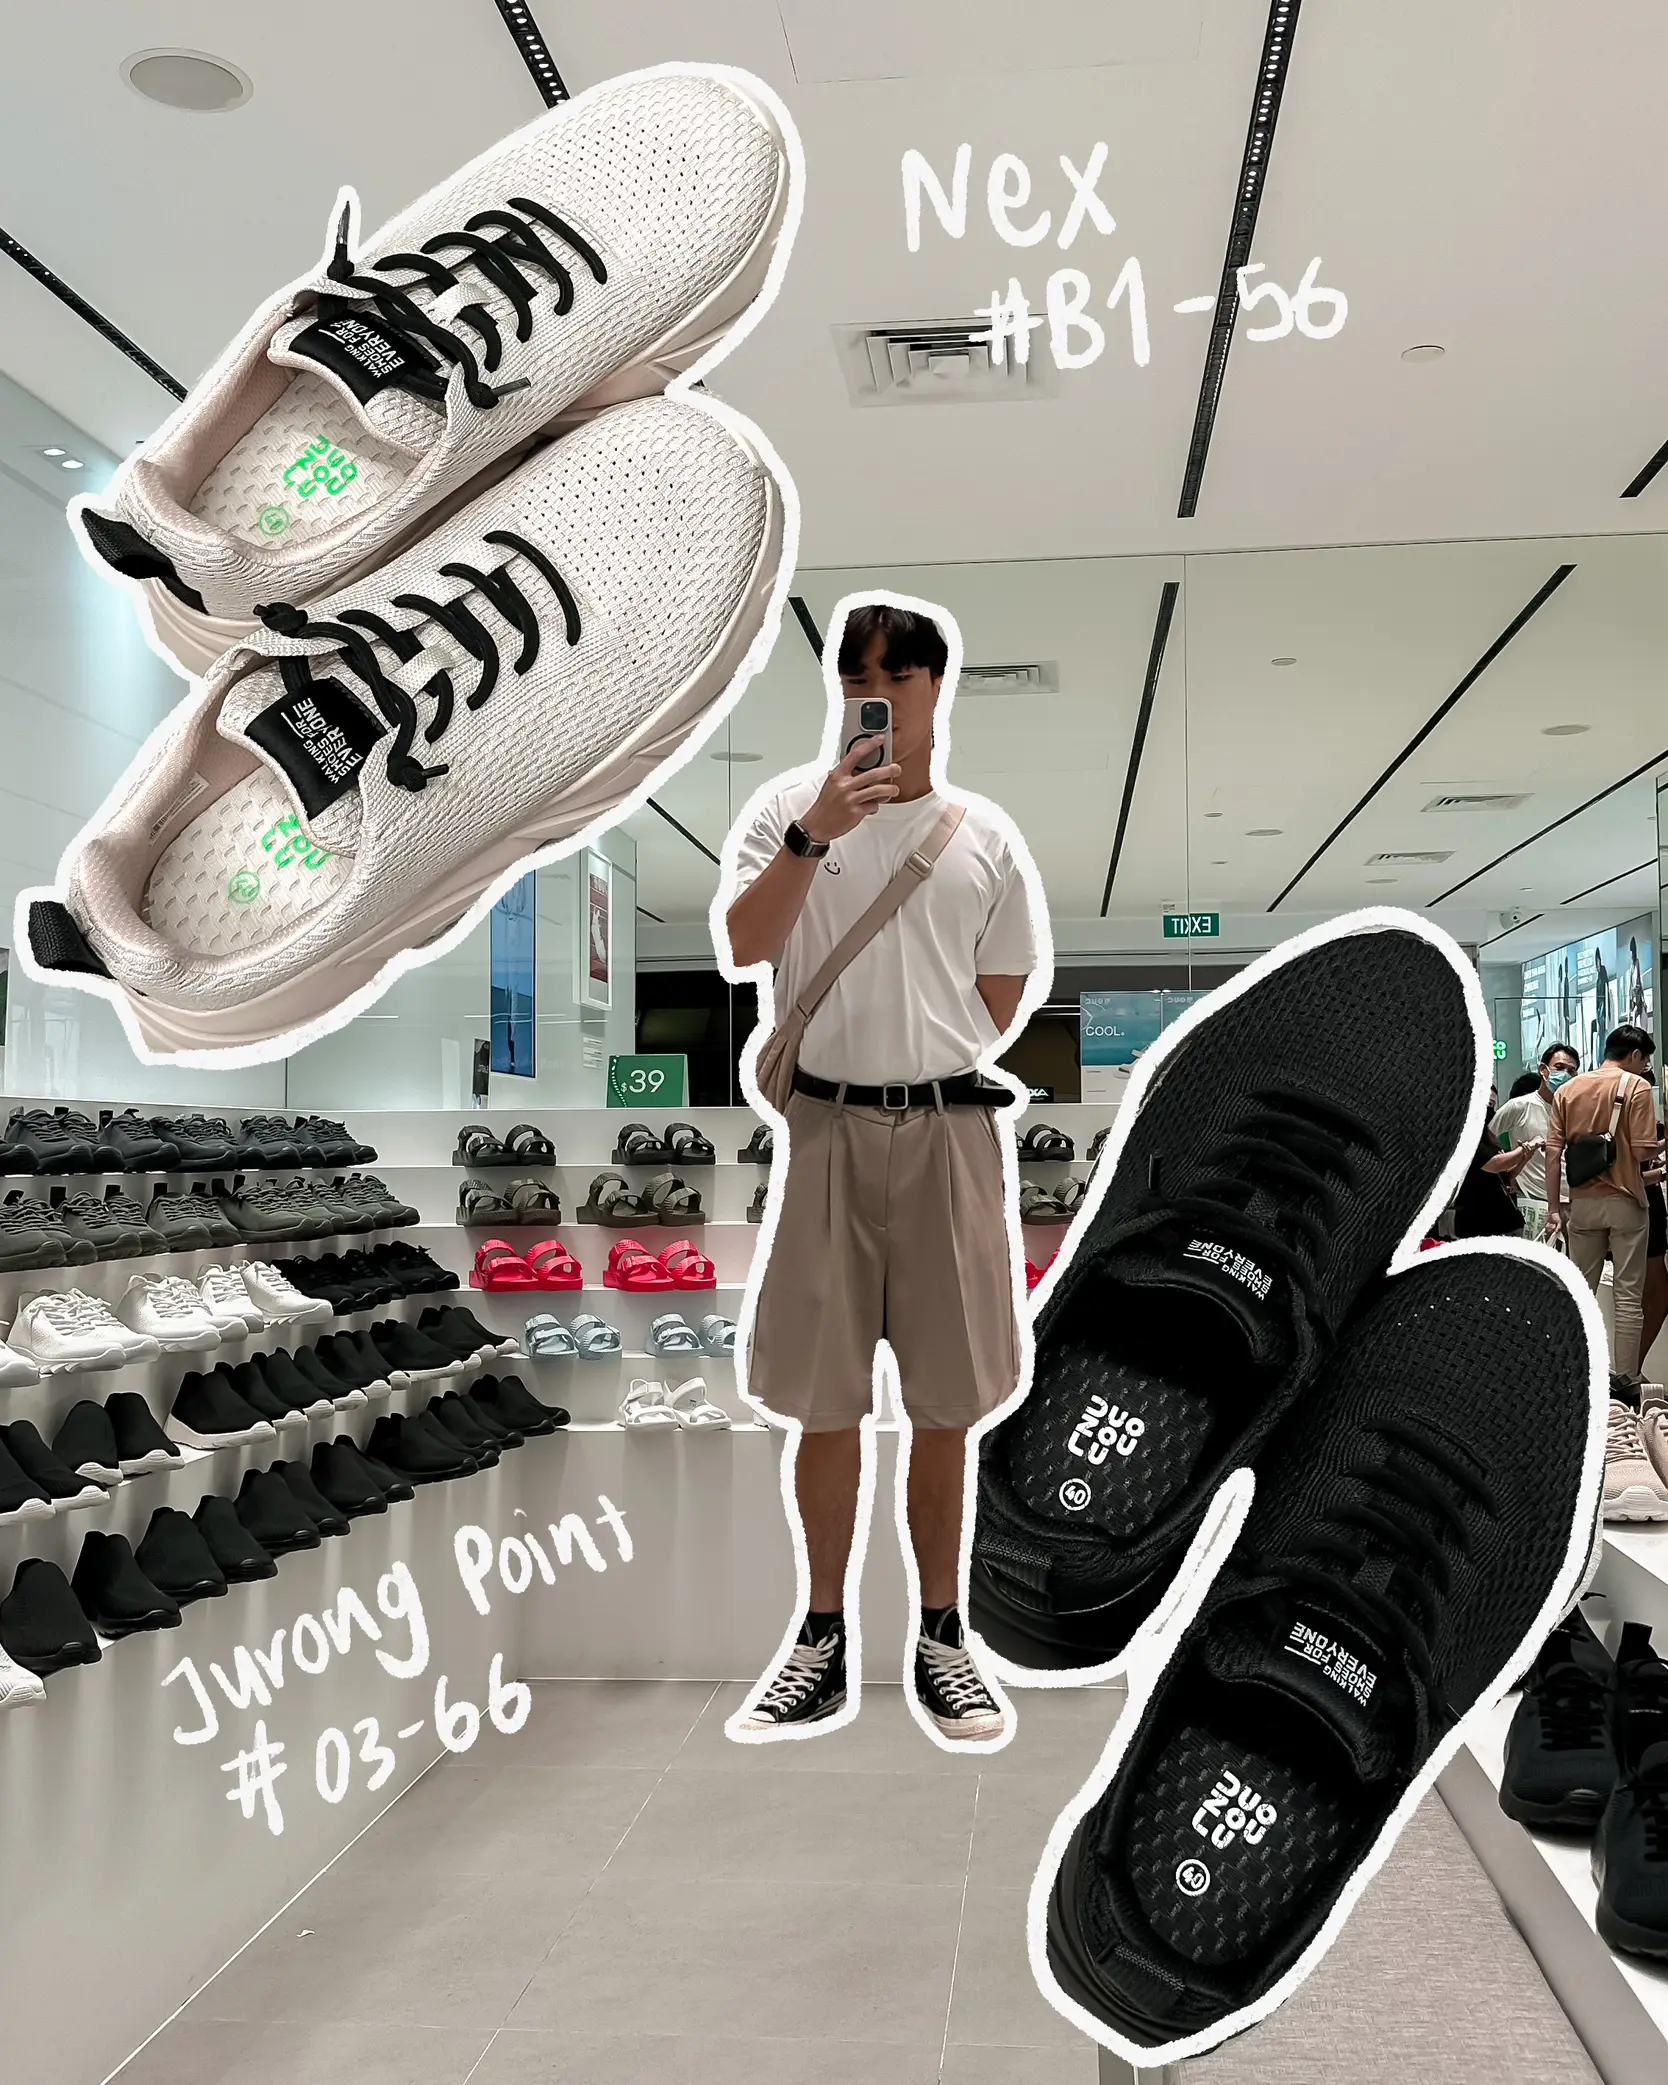 <NEW> Lightweight and comfy shoes UNDER $80 SGD 👟🏃🏻‍♂️'s images(2)